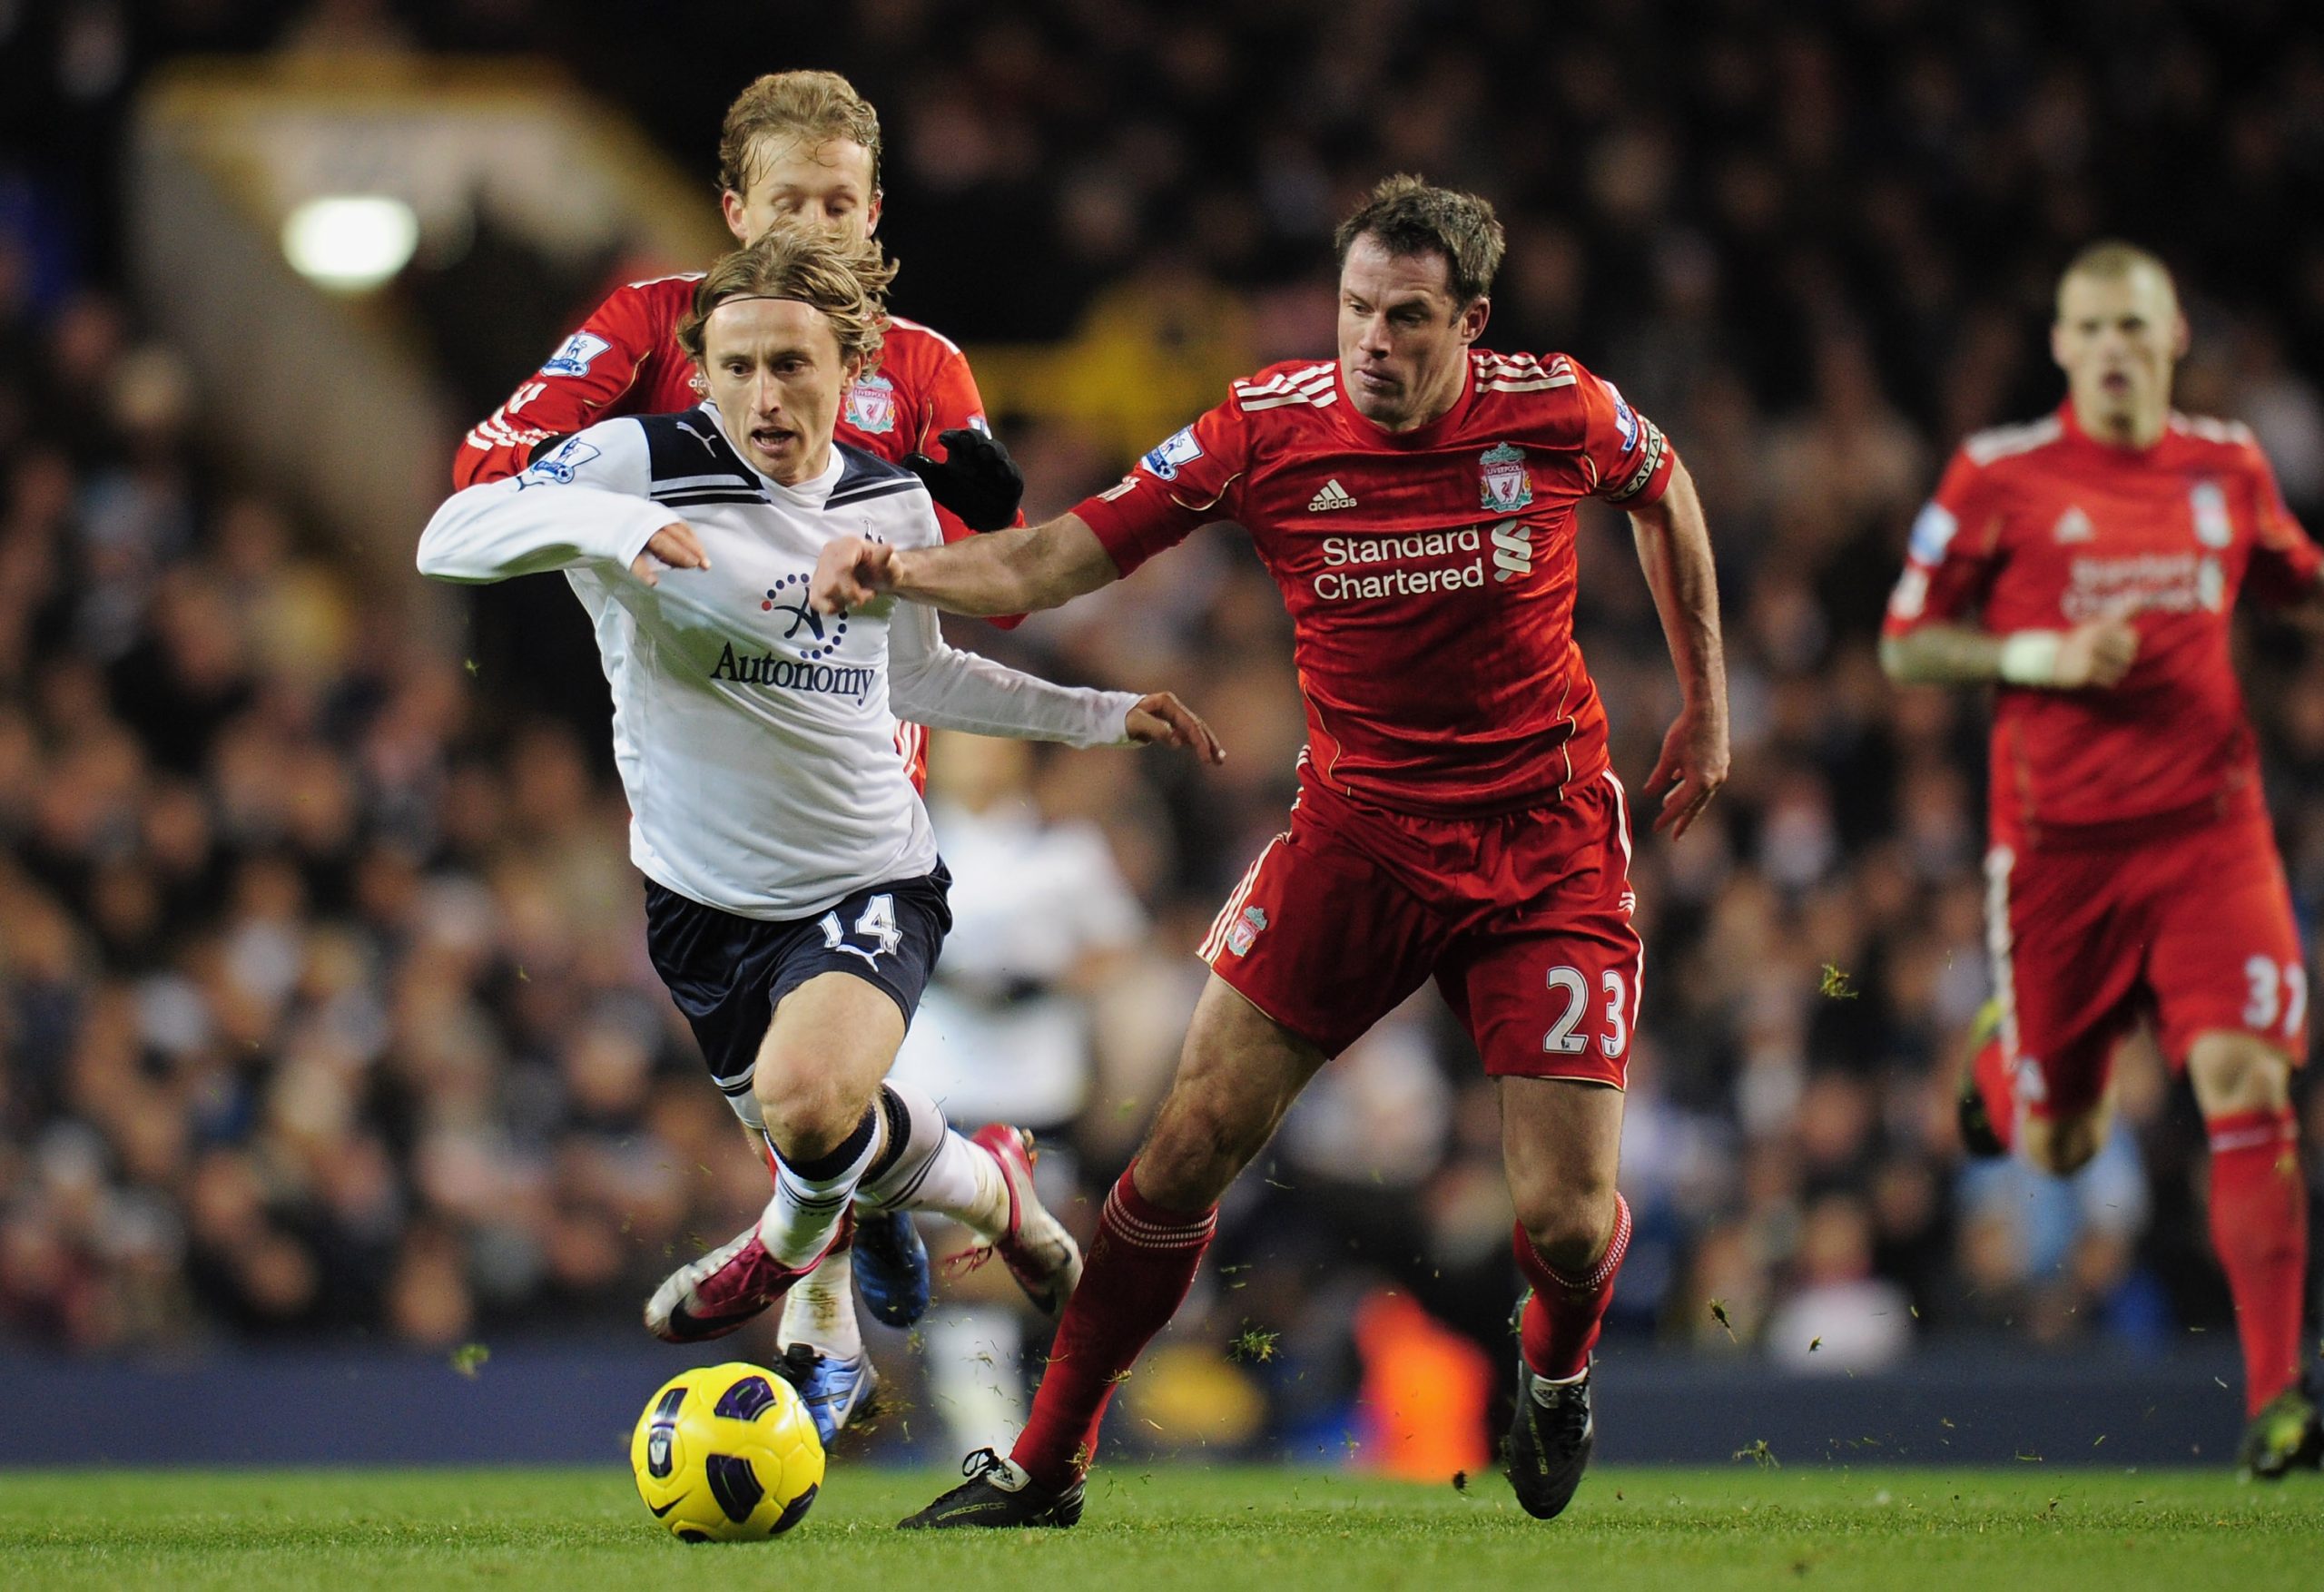 Luka Modric of Tottenham Hotspur is tackled by Jamie Carragher of Liverpool - November 2010.